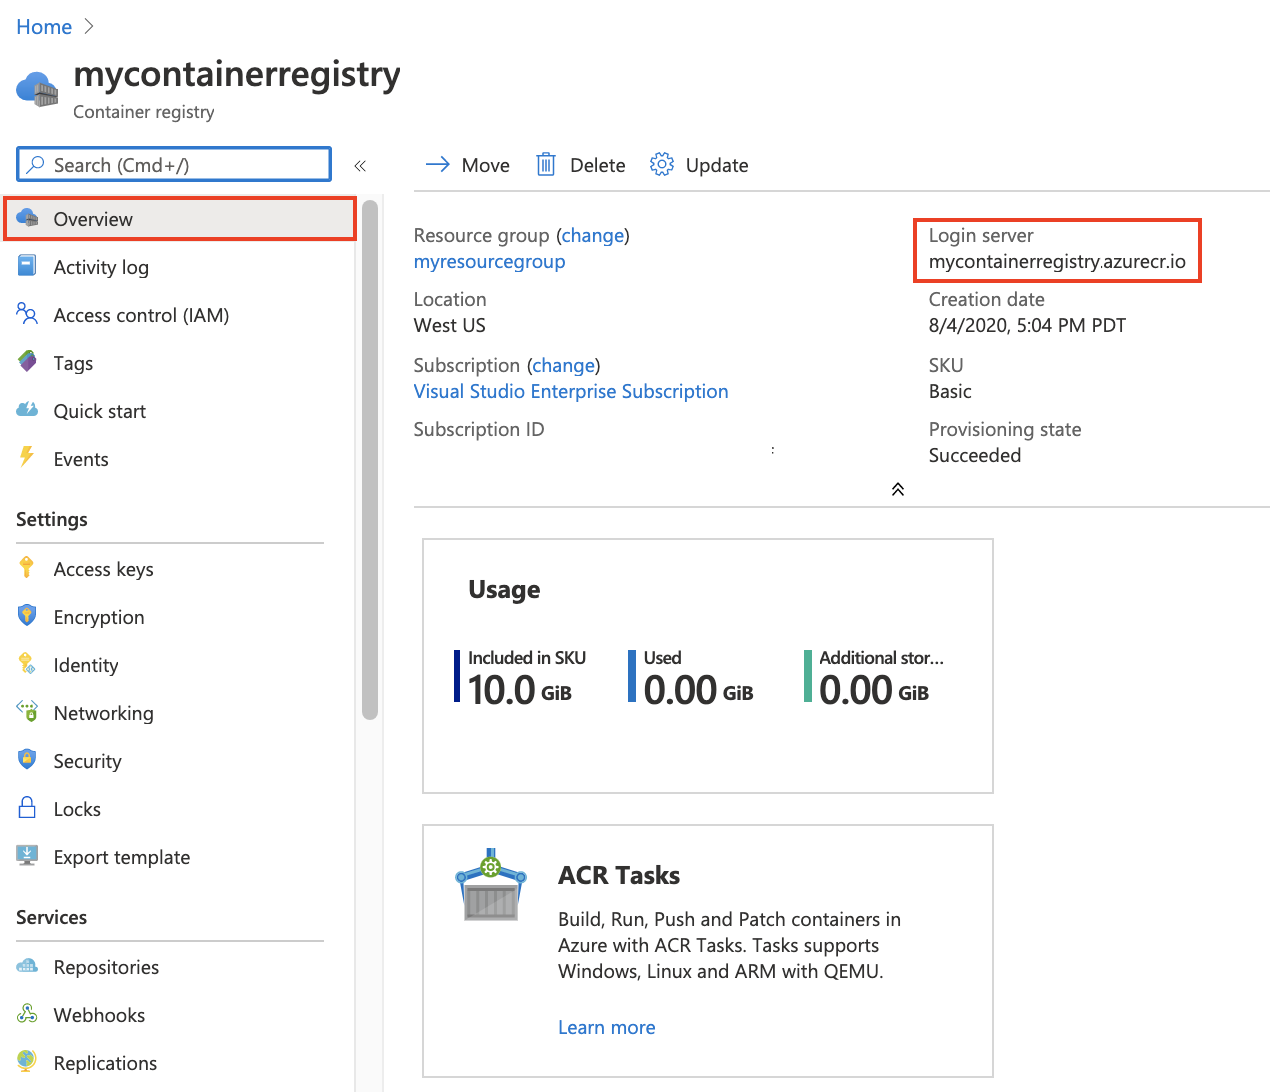 Container registry Overview in the portal